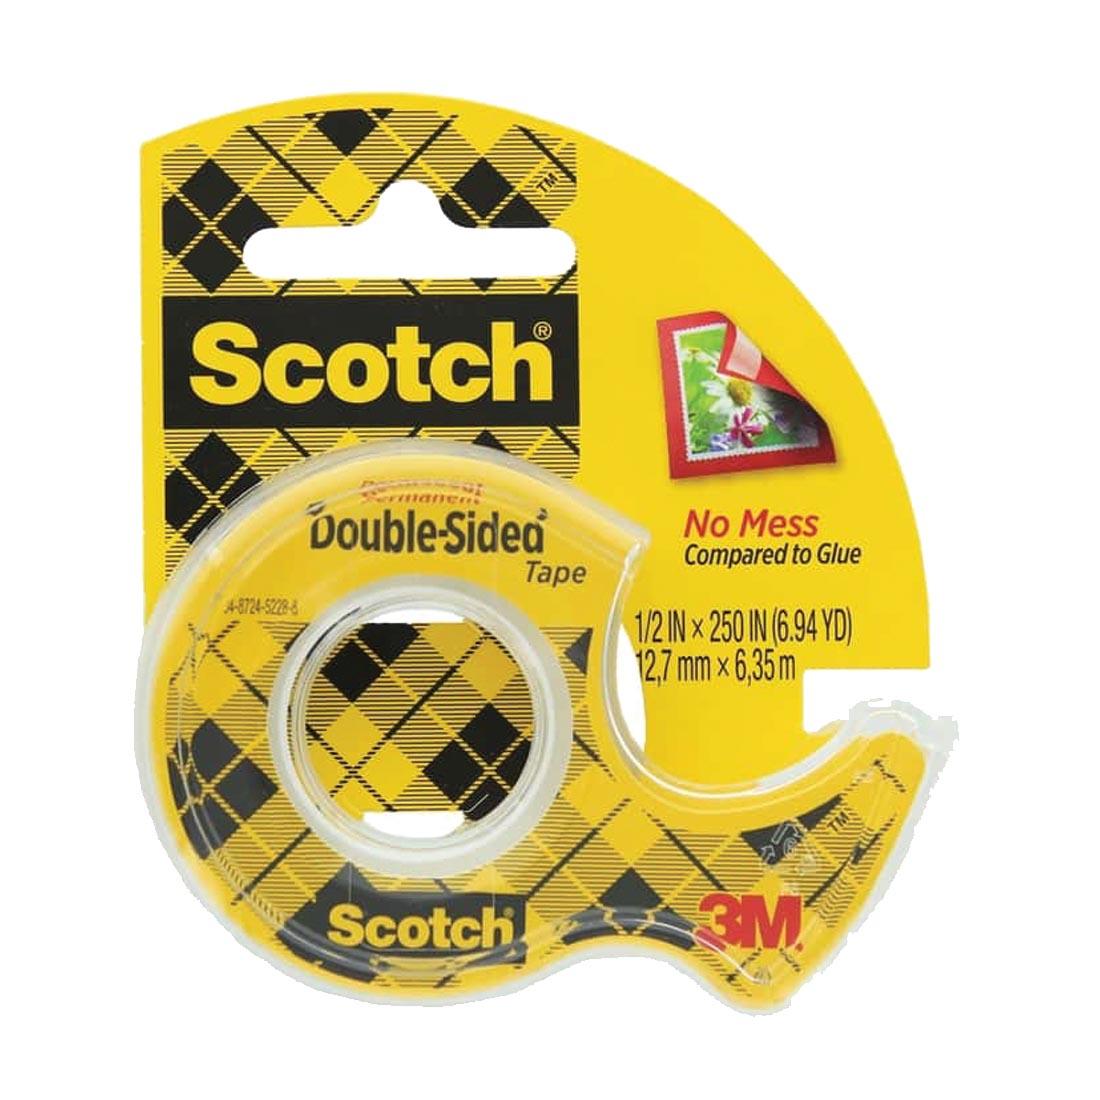 Scotch #665 Double Sided Permanent Tape dispenser pack, 1/2 x 250" roll